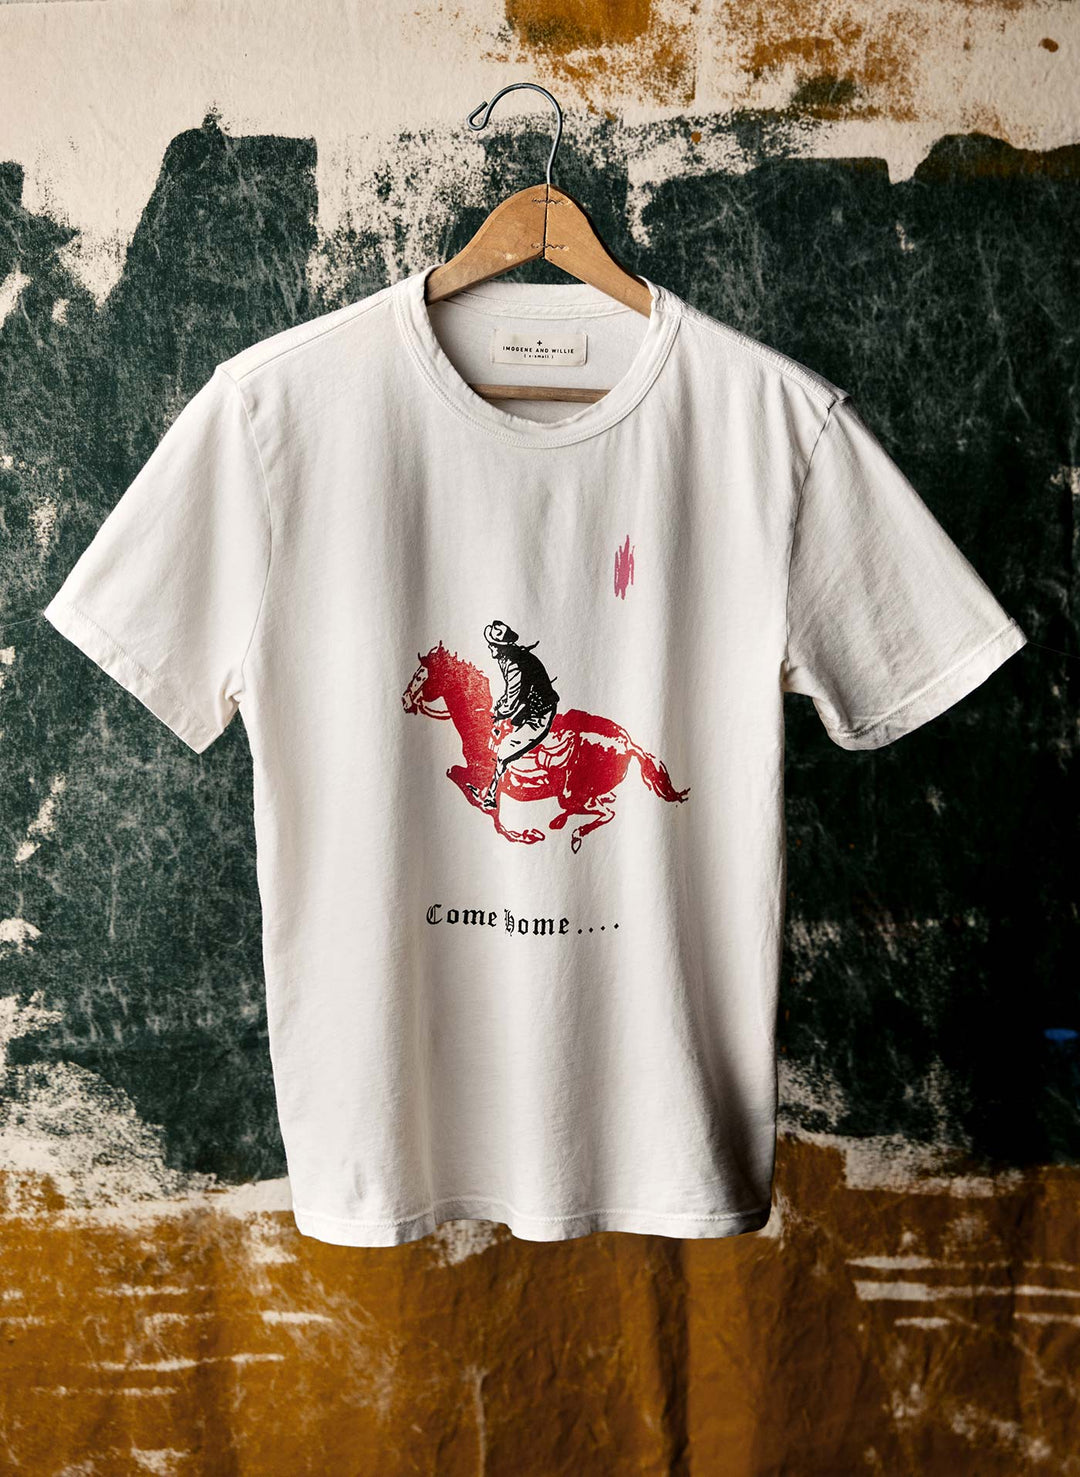 a white t-shirt with a horse on it